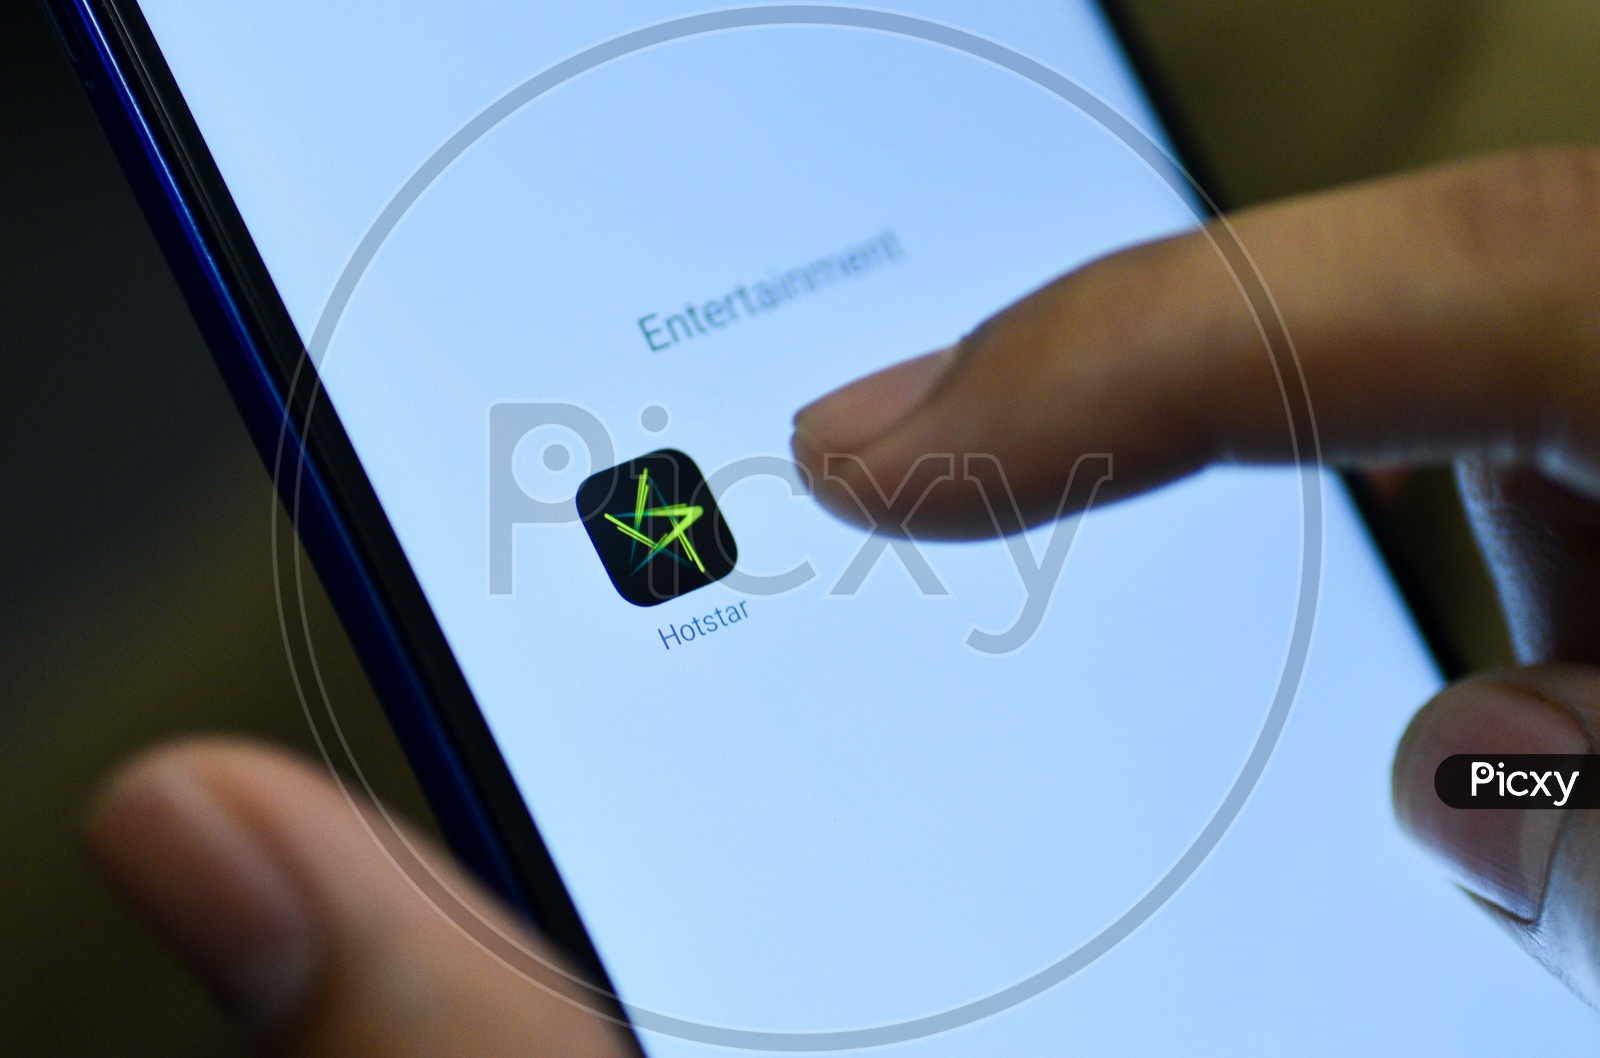 Hotstar Mobile App Icon Opening on Smartphone Screen  Closeup With Finger